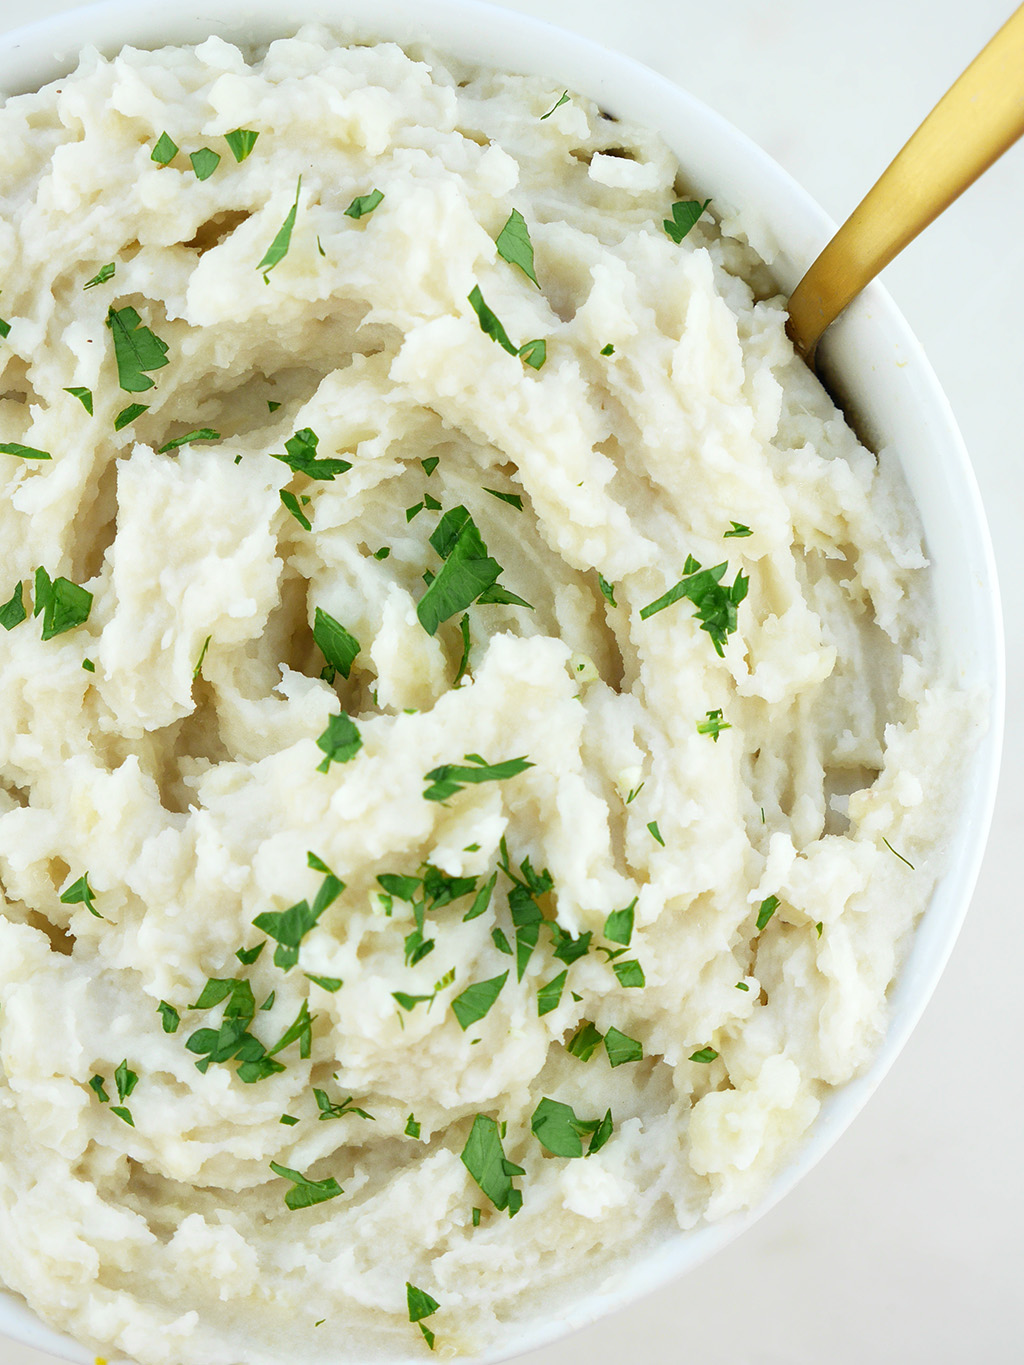 Parsnip and Cauliflower Mashed Potatoes Pacific Foods Cashew Non-Dairy Beverage